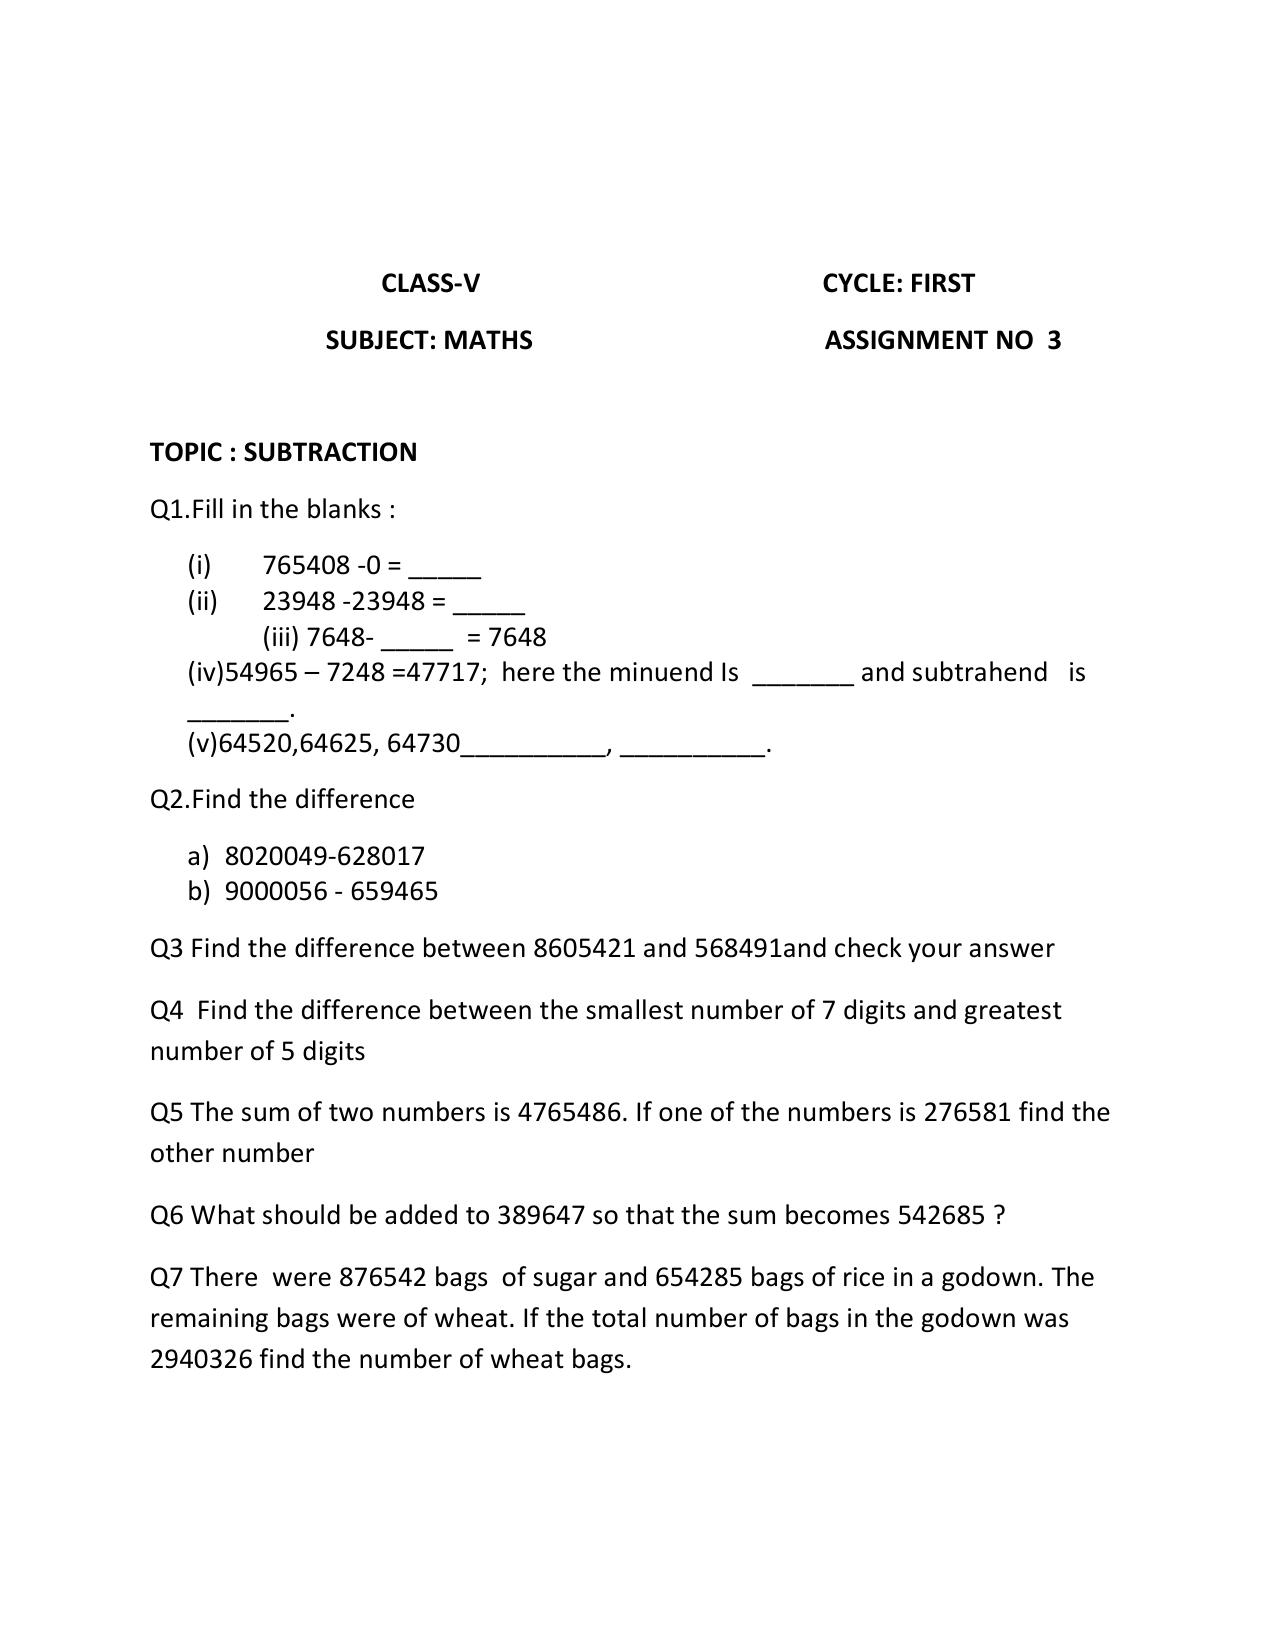 Worksheet for Class 5 Maths Assignment 42 - Page 1